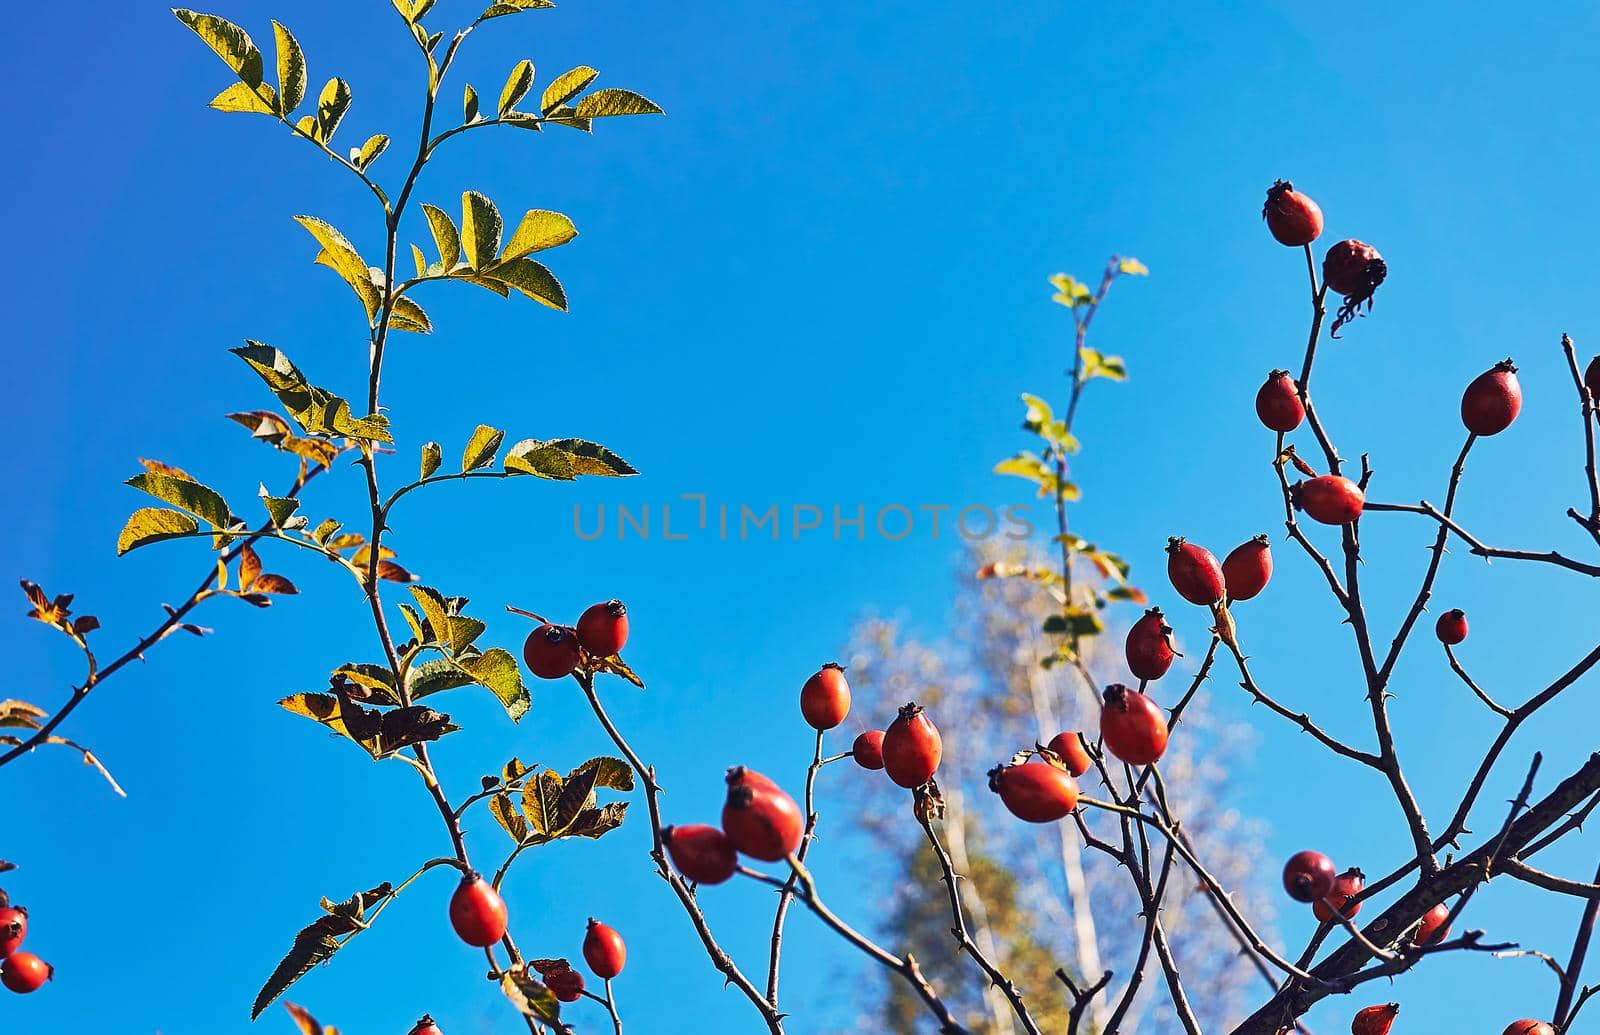 Rosehip bush with ripe healthy berries shining in the autumn sun by jovani68